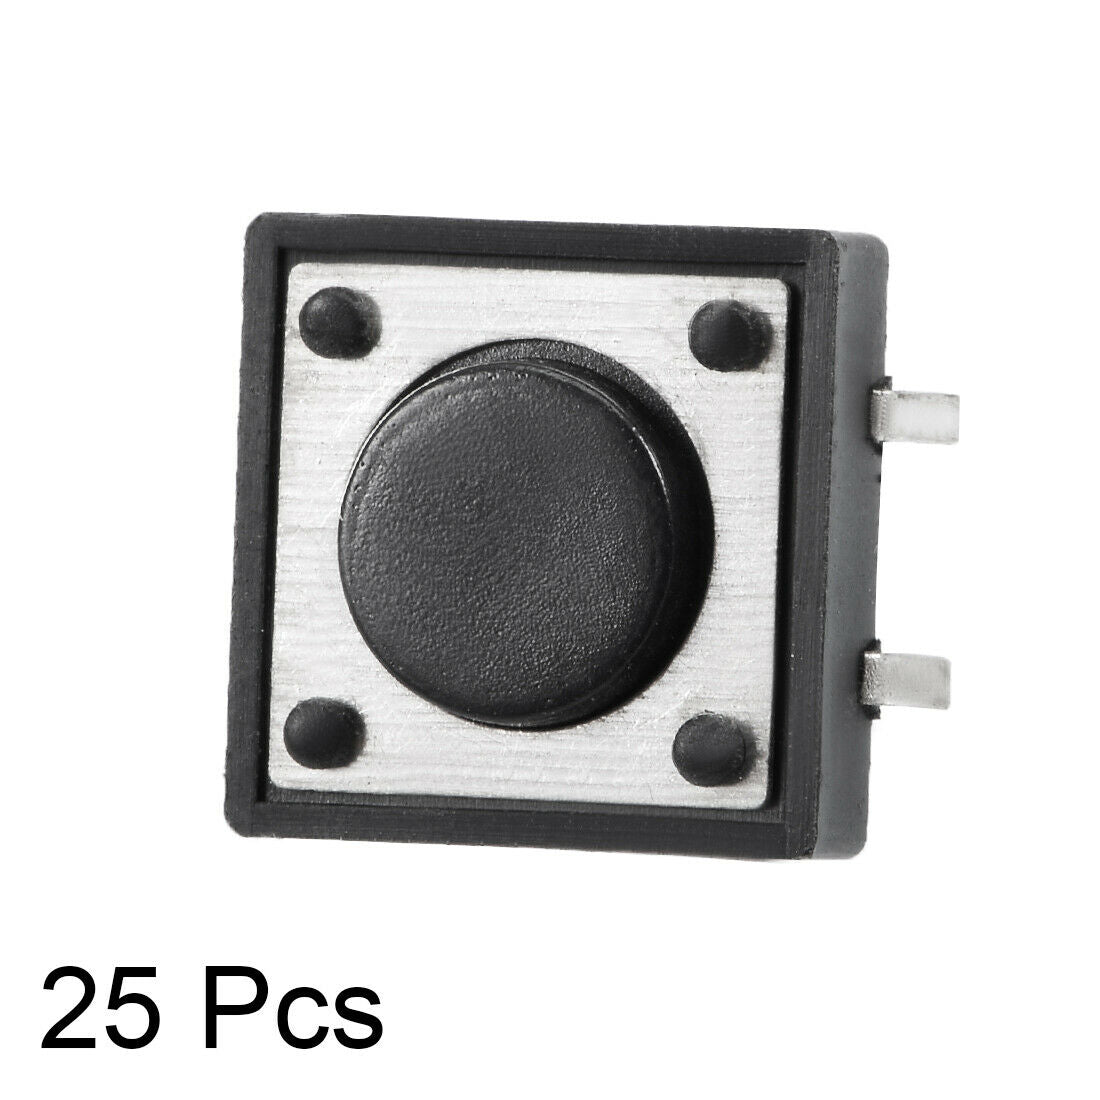 12x12x4.3mm Panel Micro PCB Momentary Tactile Push Button (25 Pack)